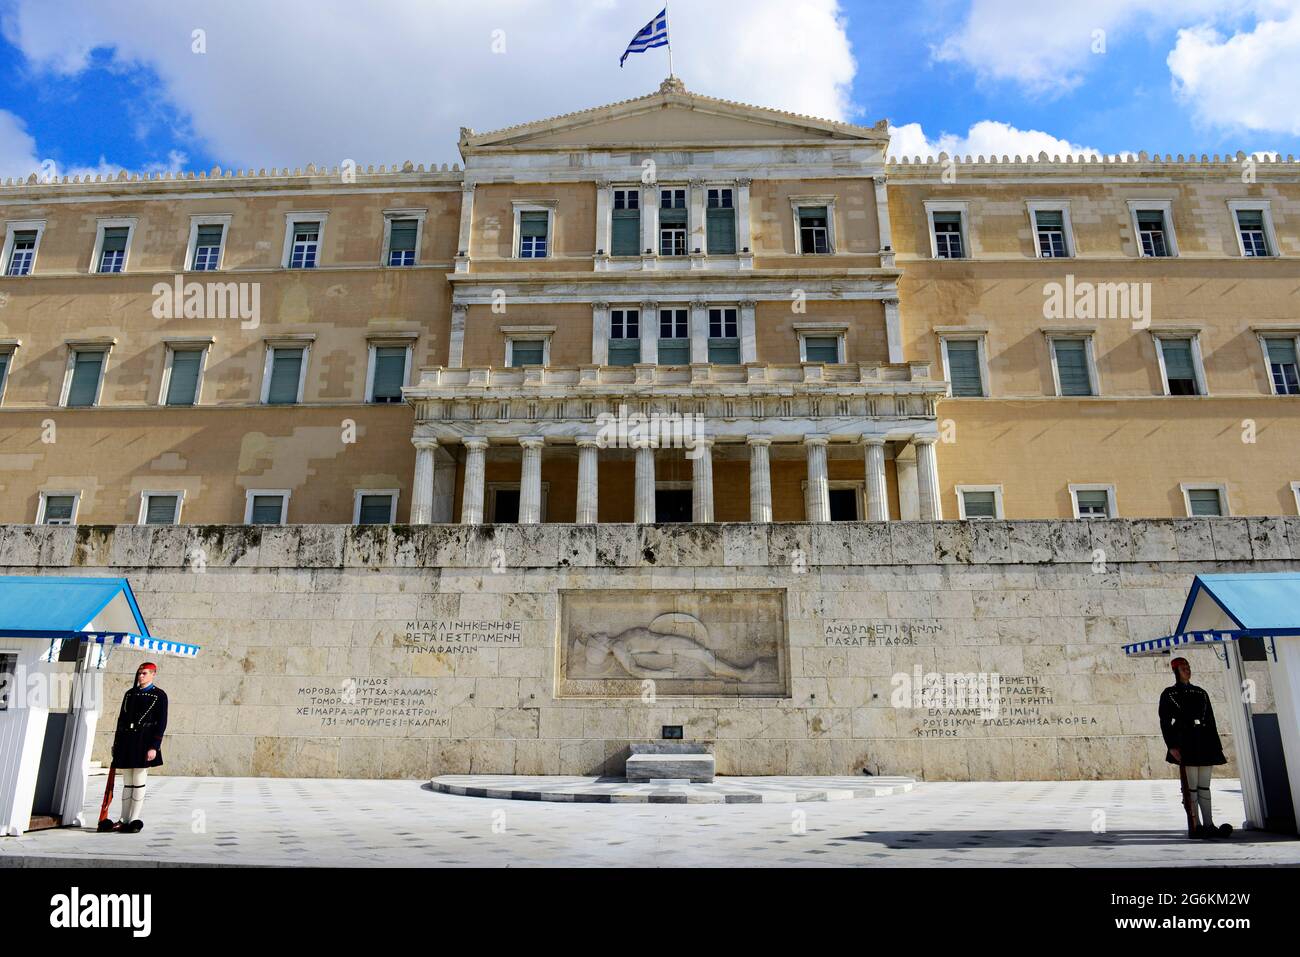 The Hellenic parliament facing Syntagma square in central Athens, Greece. Stock Photo